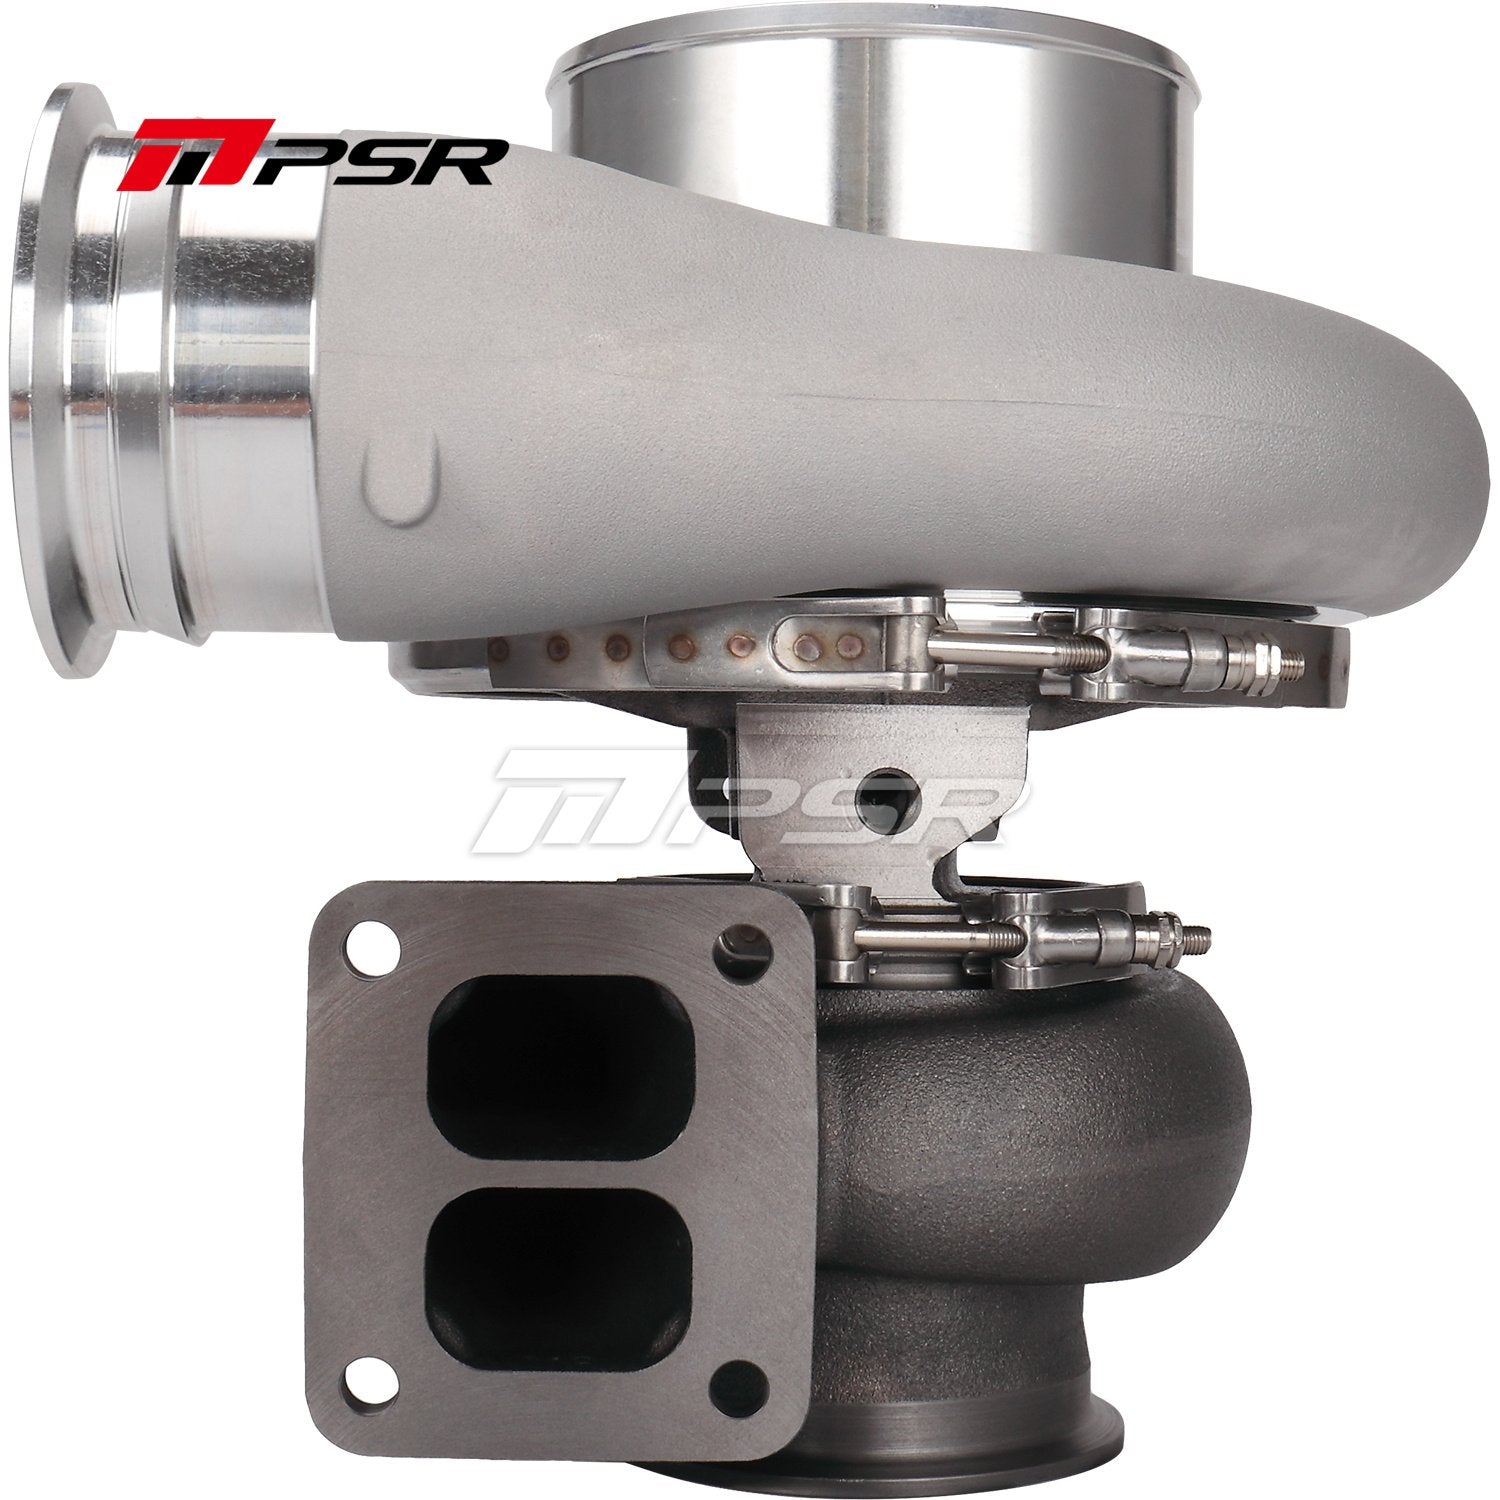 PULSAR Billet S400 Series Turbos WITH T51R MOD COMPRESSOR HOUSING